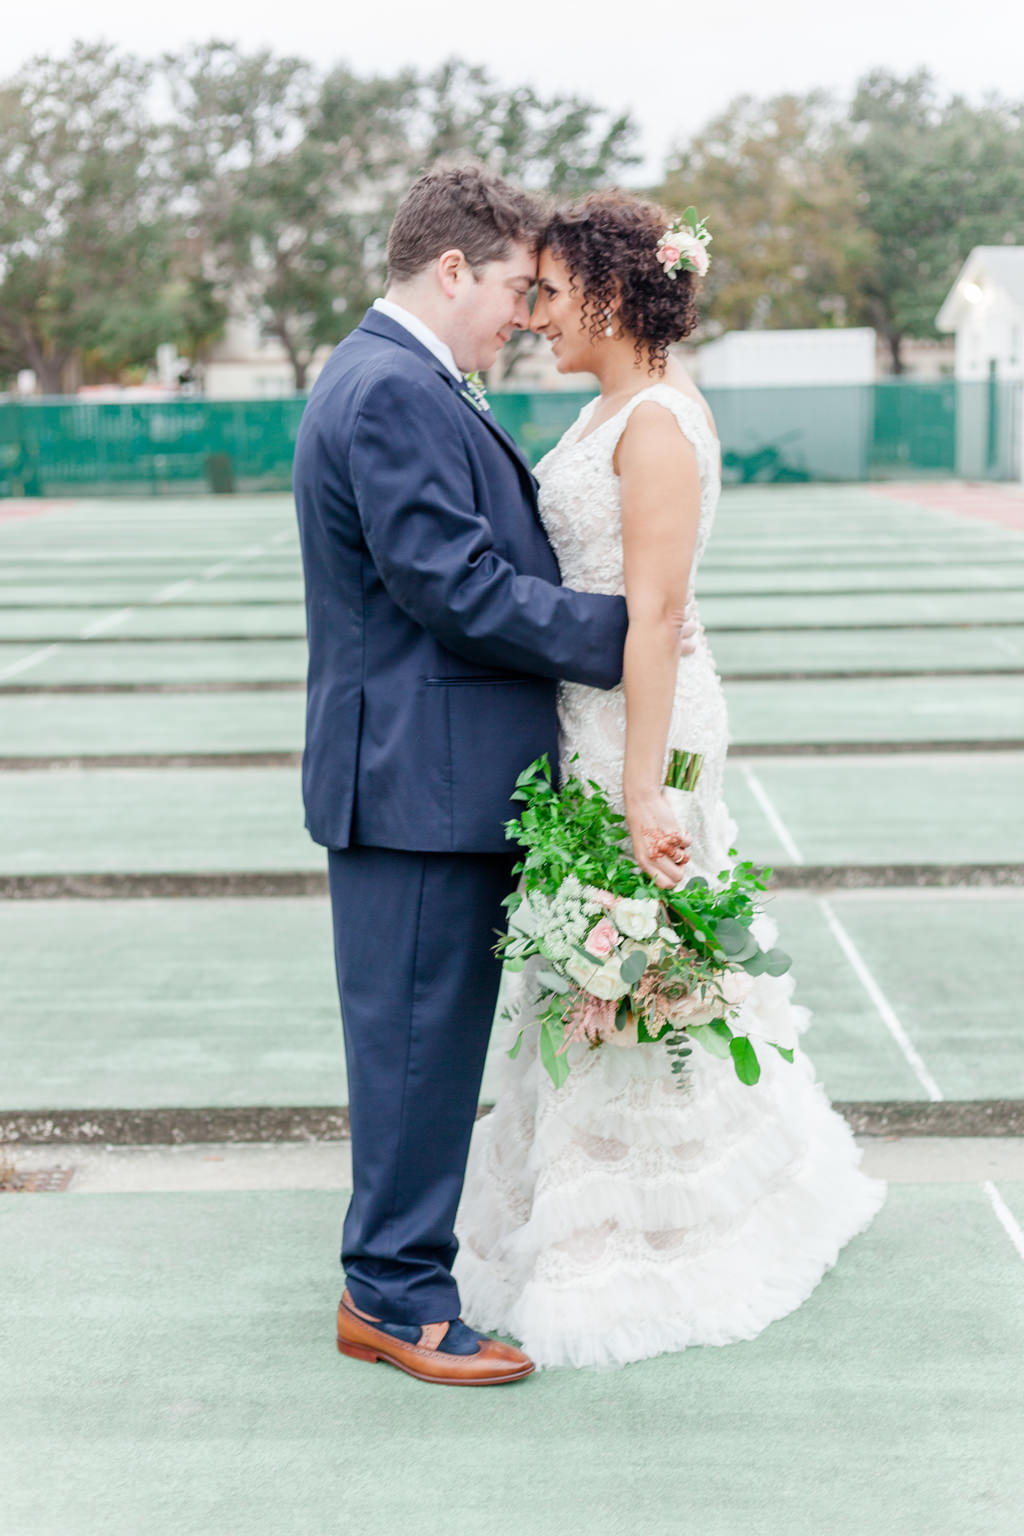 Outdoor Bride and Groom Portrait, Bride in Fringed David's Bridal Dress with Peach and Greenery Bouquet, Groom in Blue Suit with Brown Leather Shoes | Downtown St Pete Historic Wedding Venue The St Petersburg Shuffleboard Club | Tampa Bay Florist Cotton and Magnolia